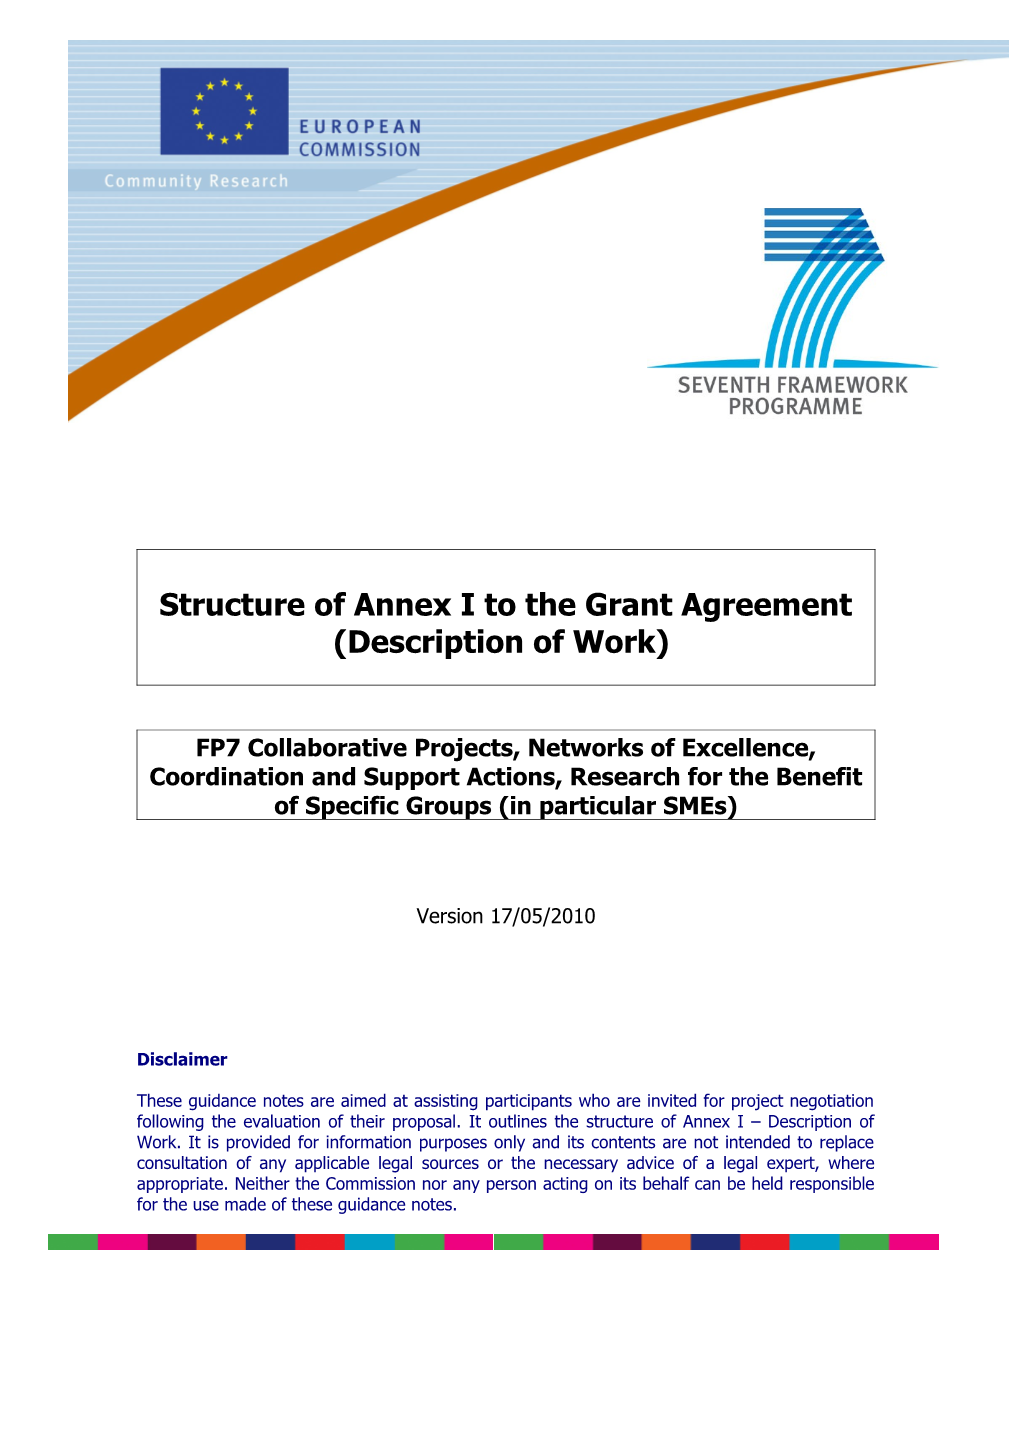 Structure of Annex I to the Grant Agreement (Description of Work)